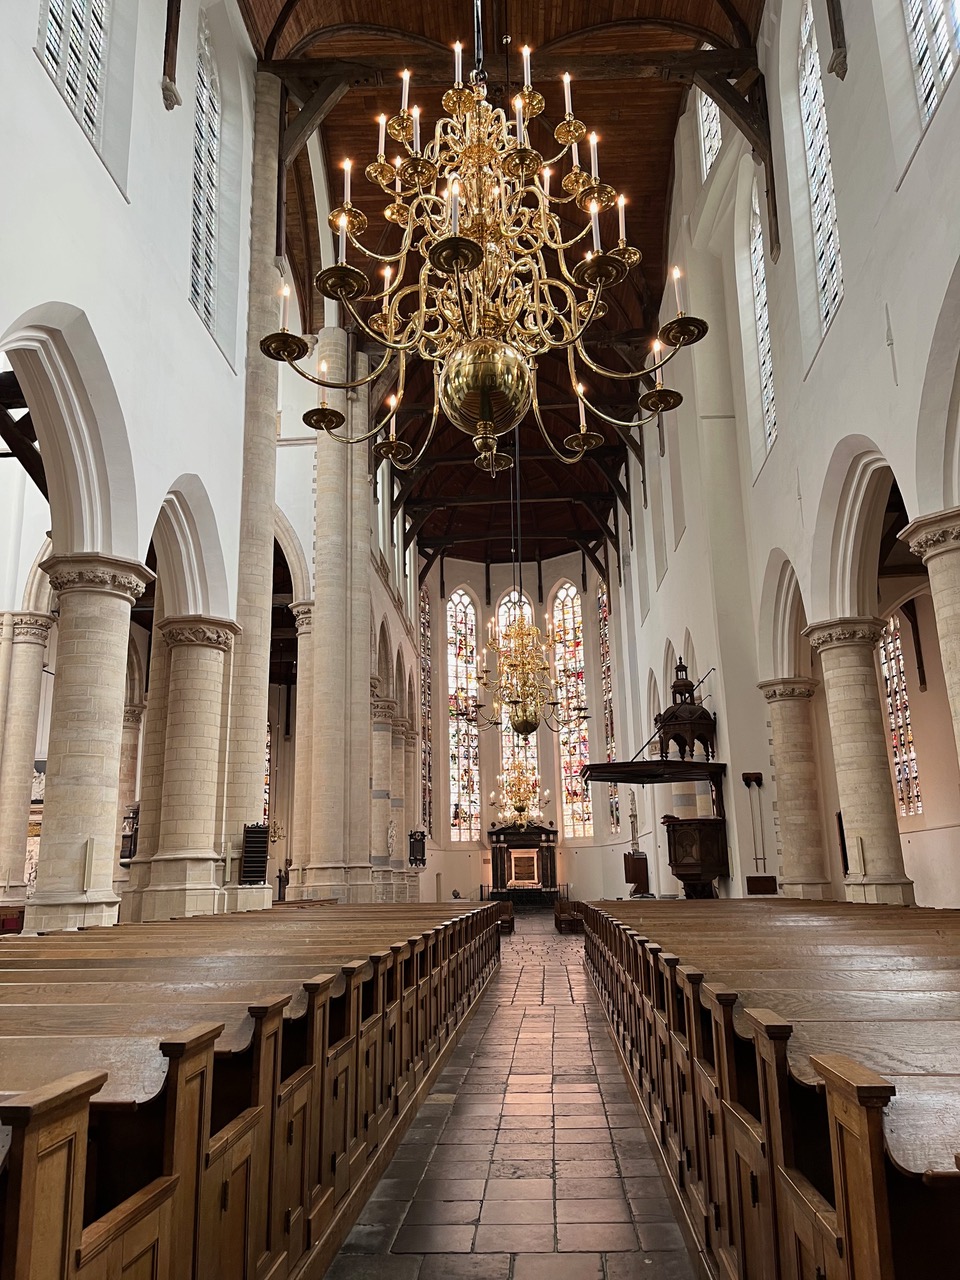 White-washed interior of the old church of Delft